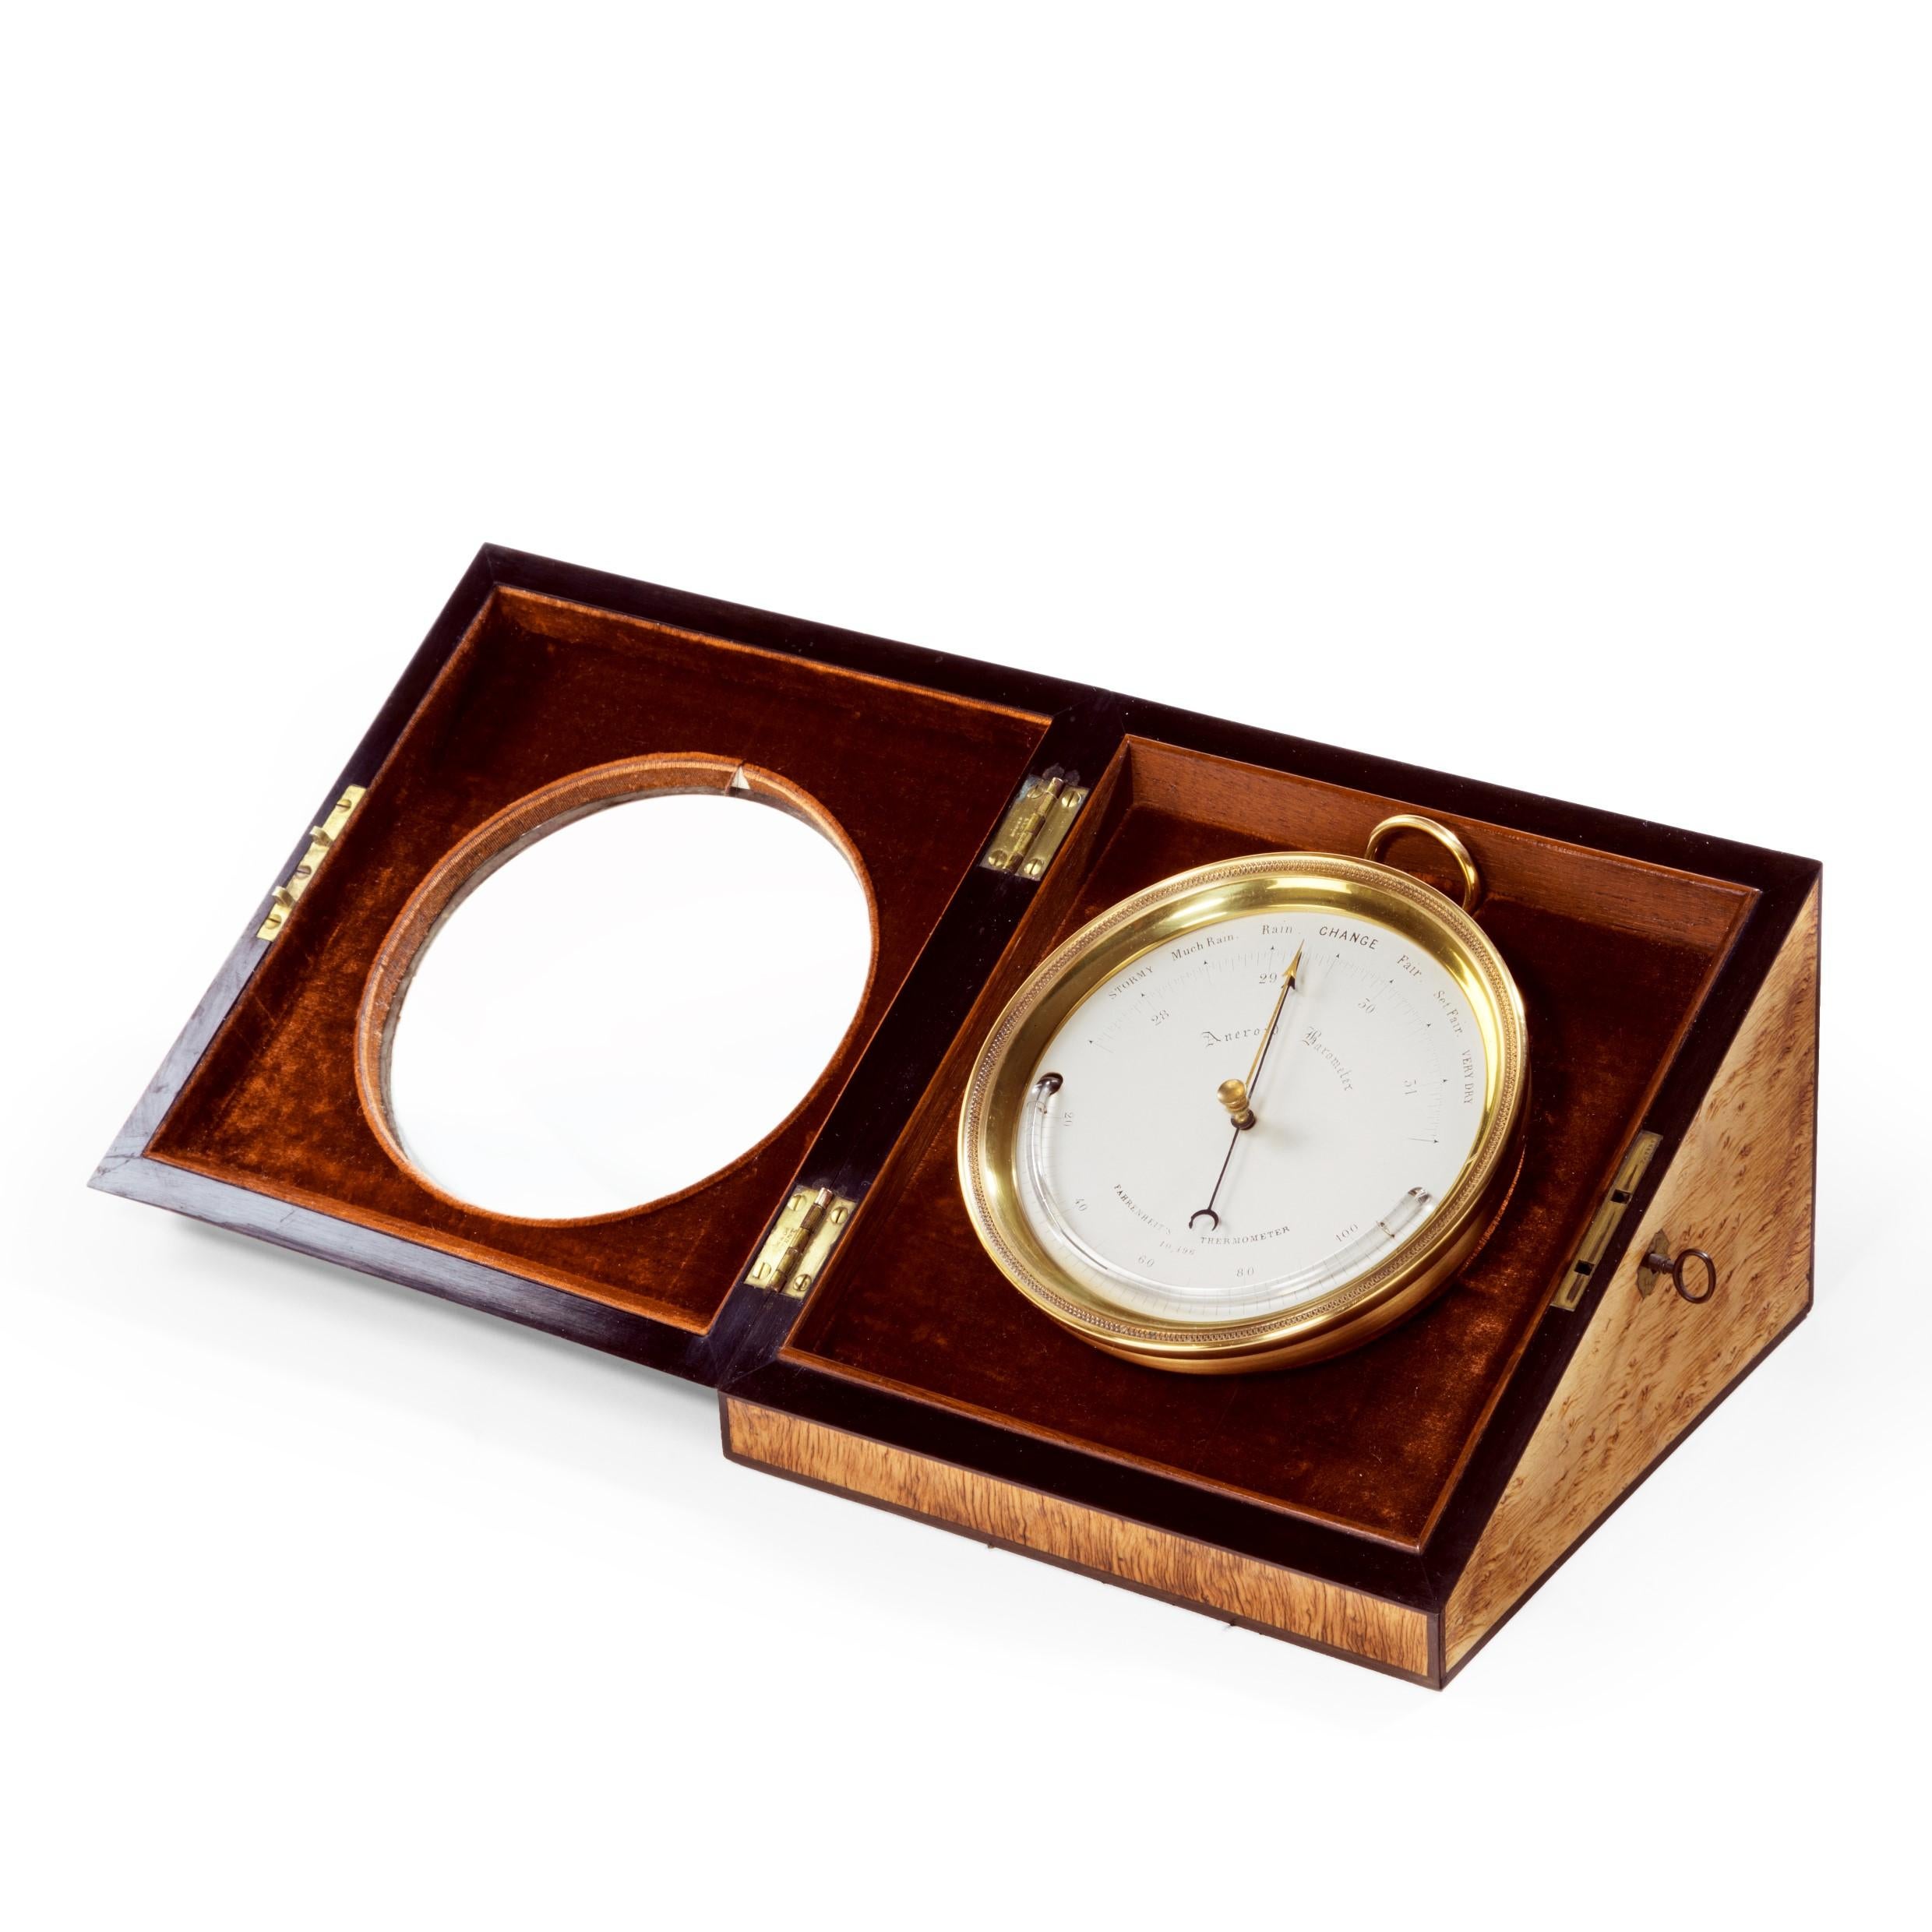 An aneroid desk barometer by C W Dixey, the 4inch silvered dial with blued indicator and gilt recorder needles divided to 32 millibars, with curved bar Fahrenheit thermometer, the gilt brass case engraved ‘Sold by C. W. Dixey, Optician to the Queen,